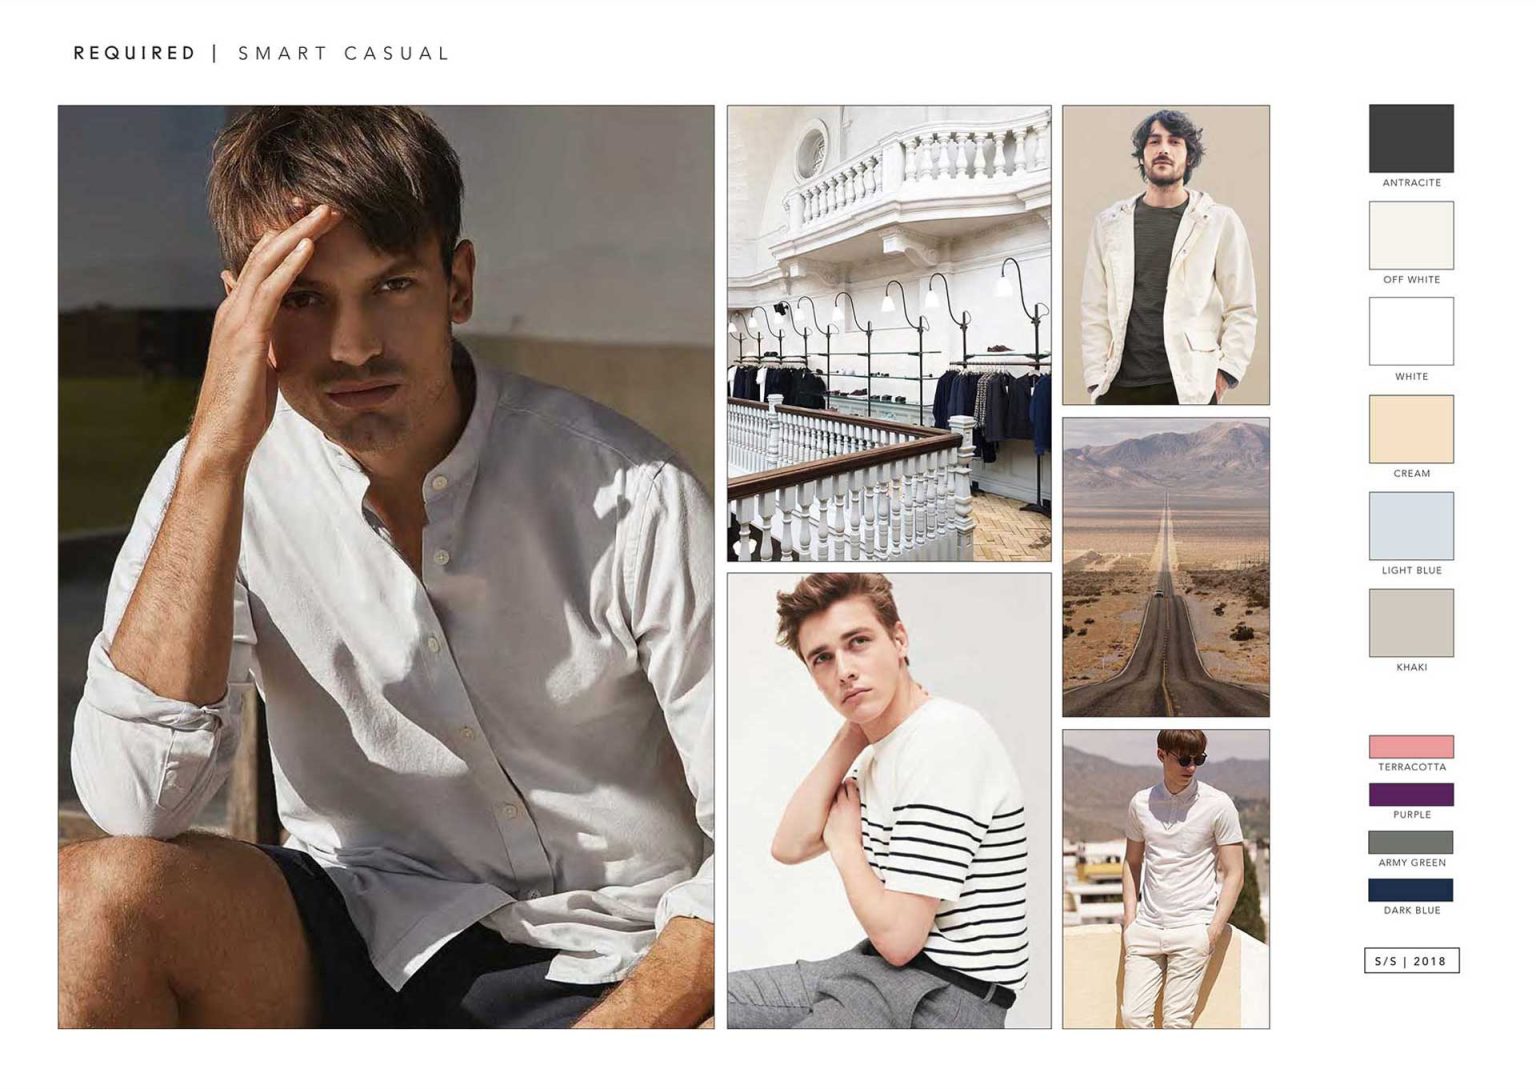 A mood board for a semi-dressed clothing line for men